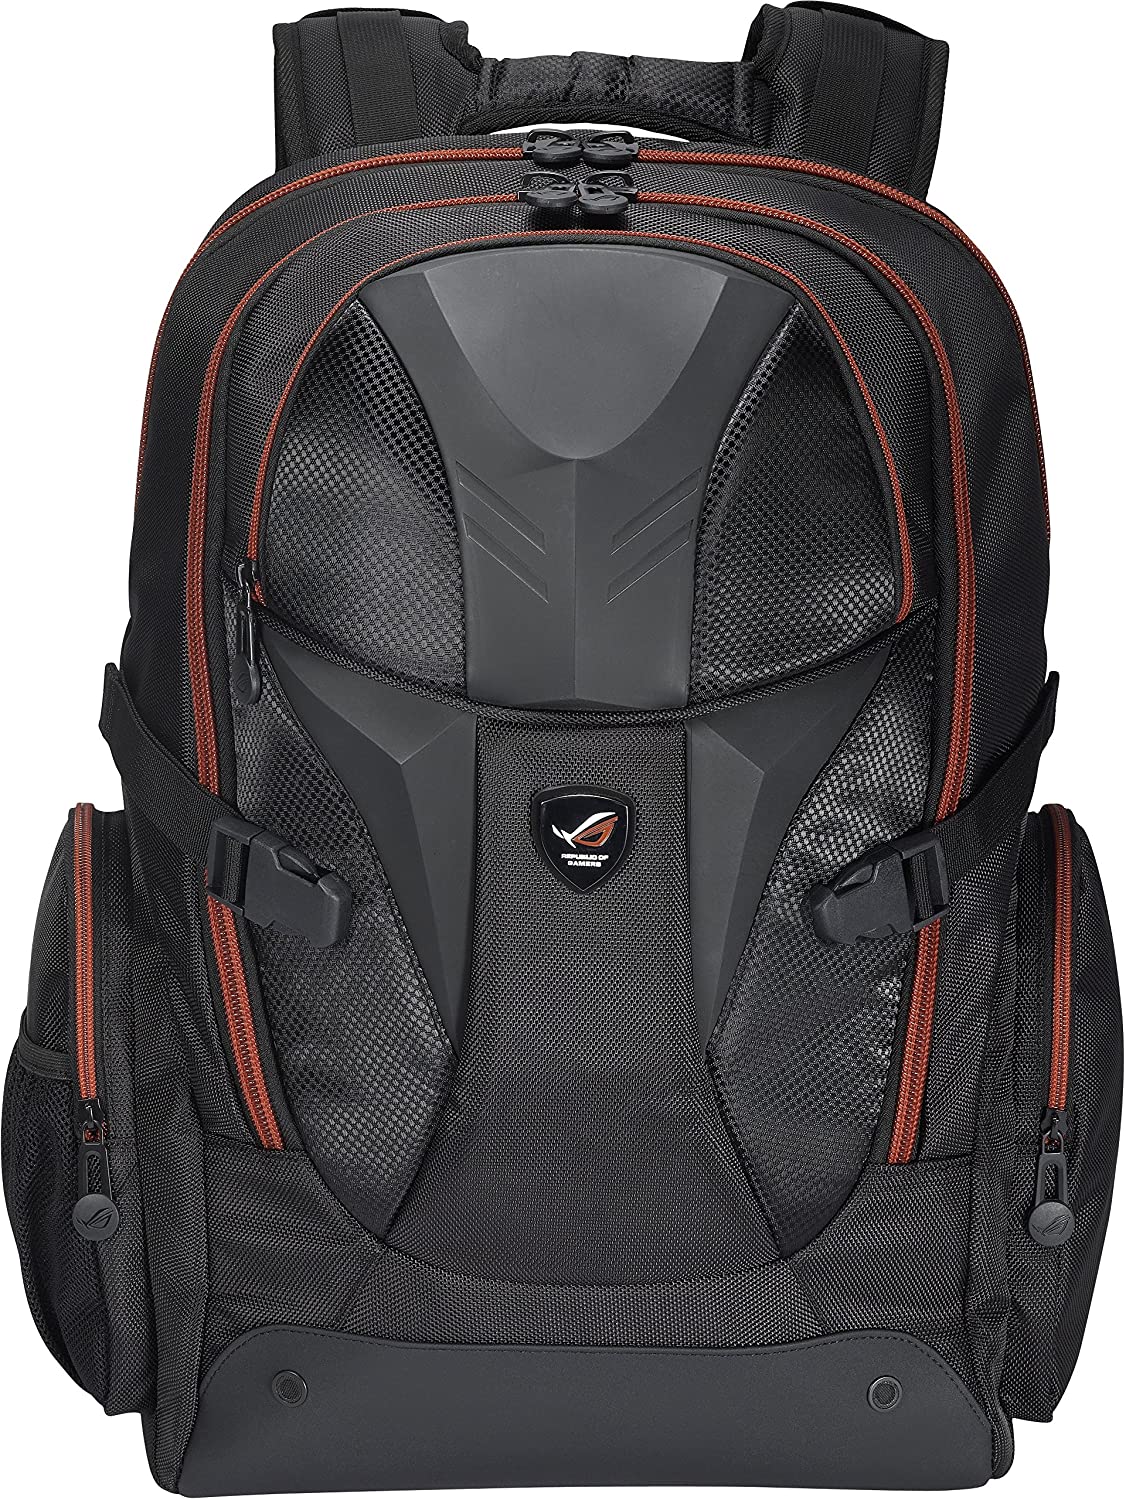 ASUS Republic of Gamers Nomad Backpack  (G-Series 17 Inches)